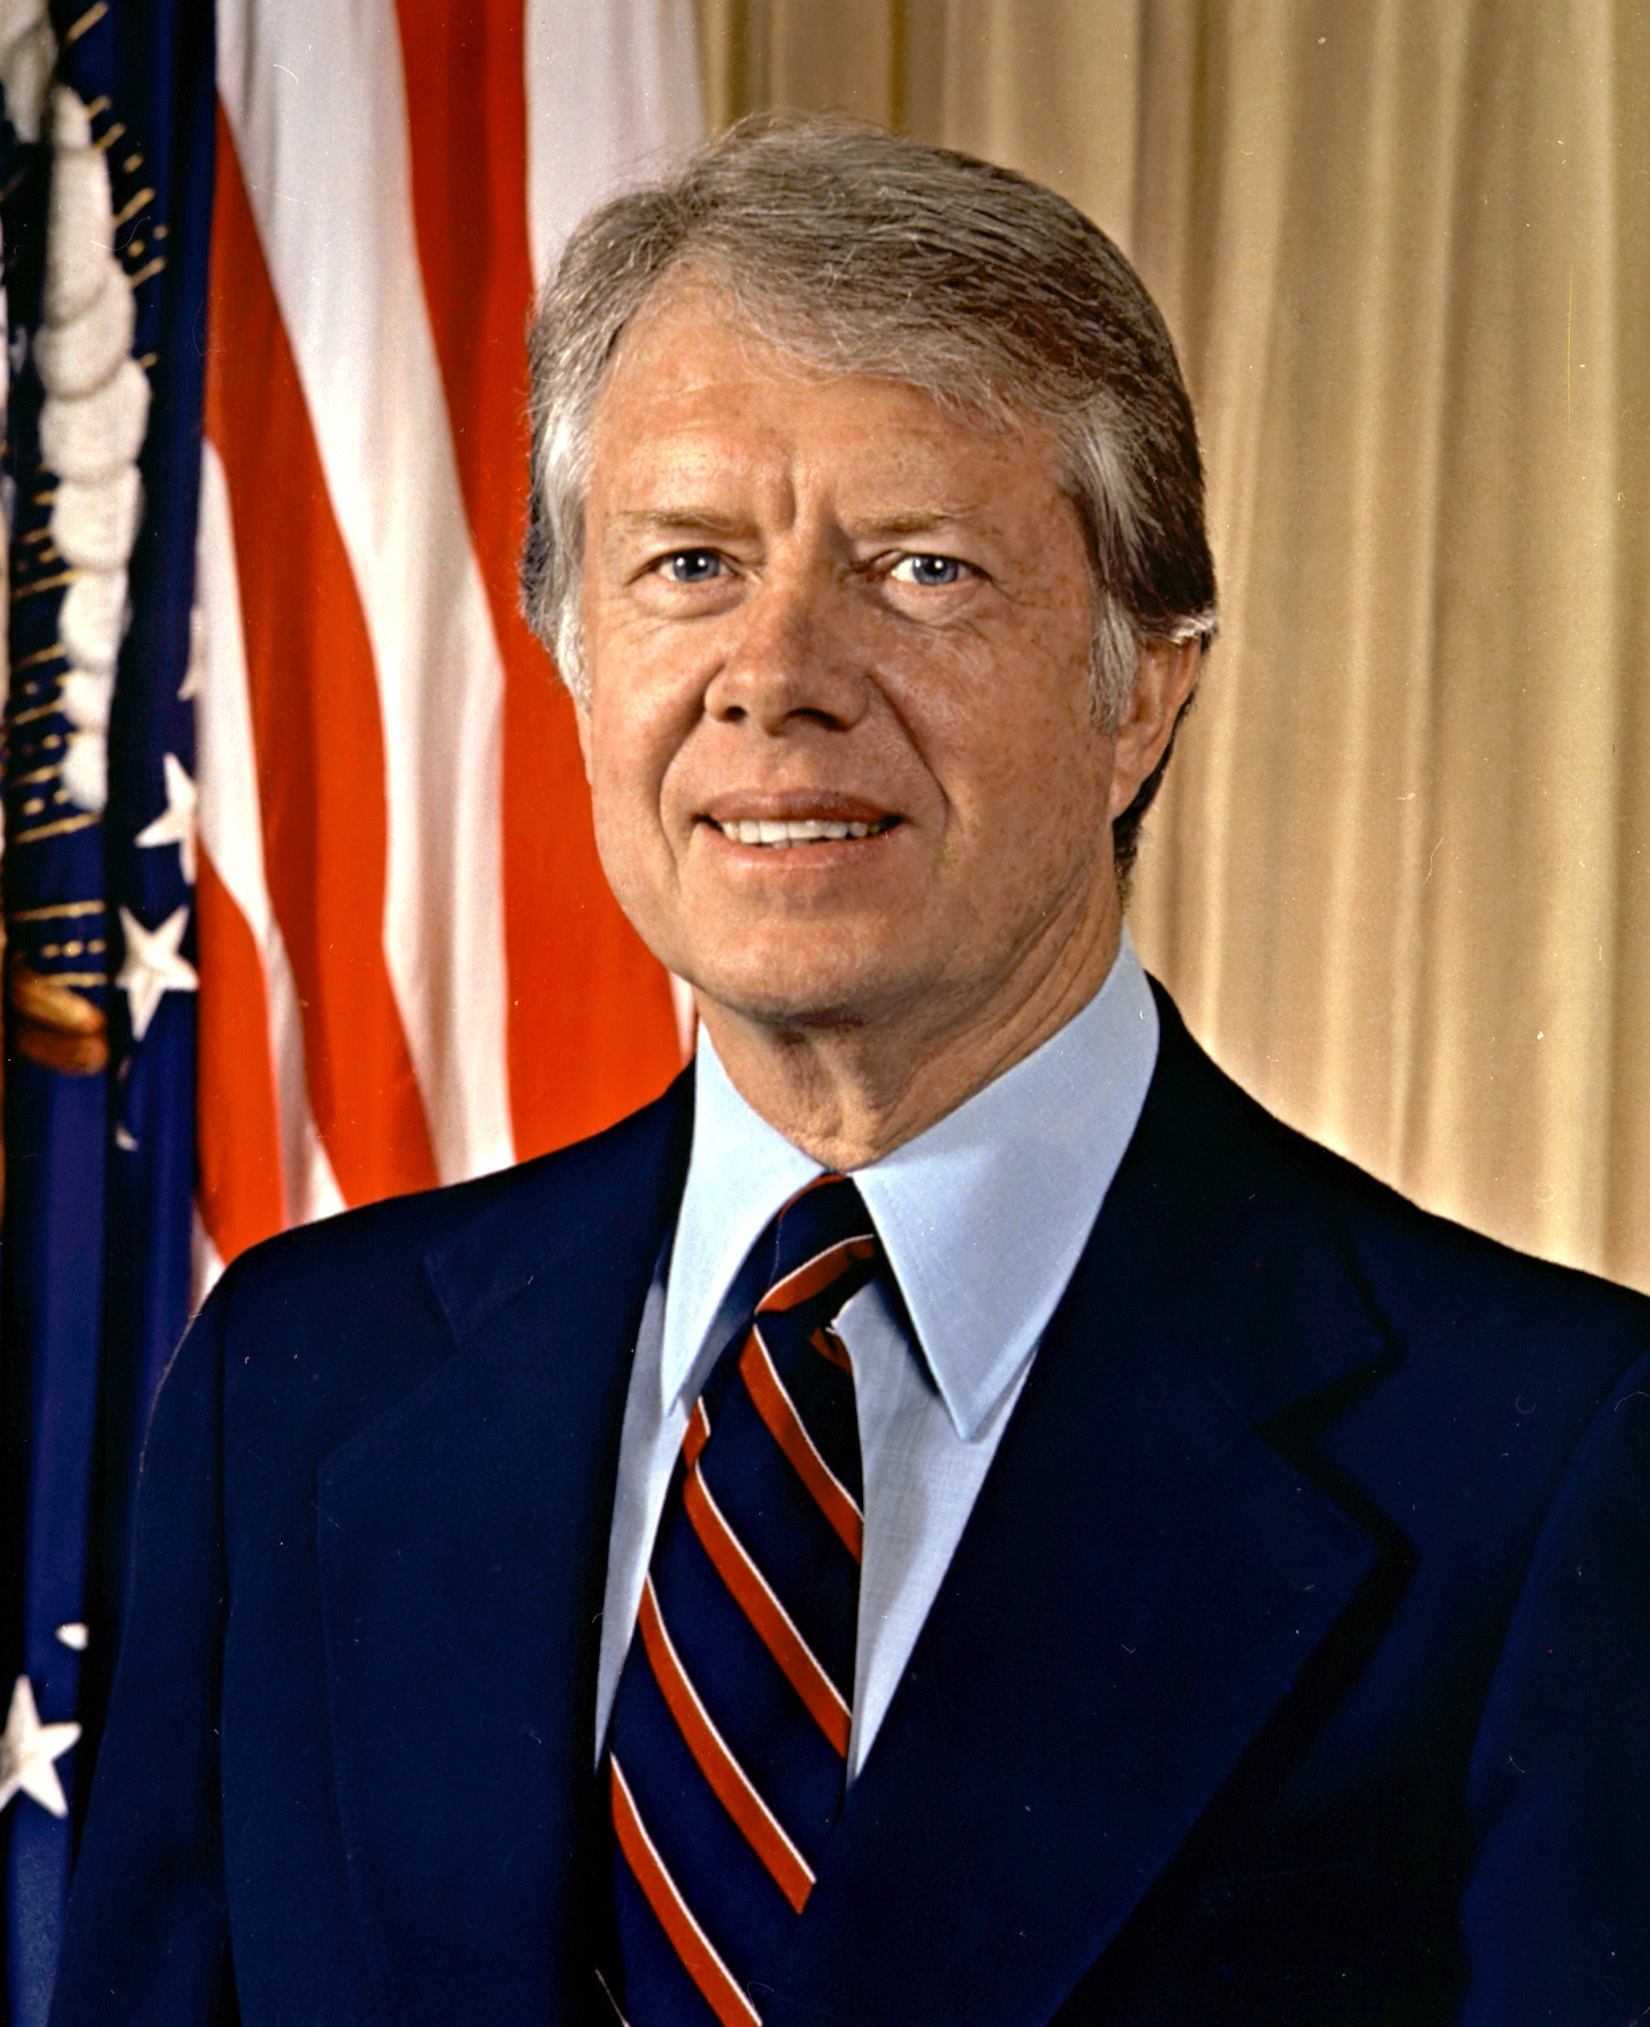 Jimmy Carter created the Departmen of Energy in 77.